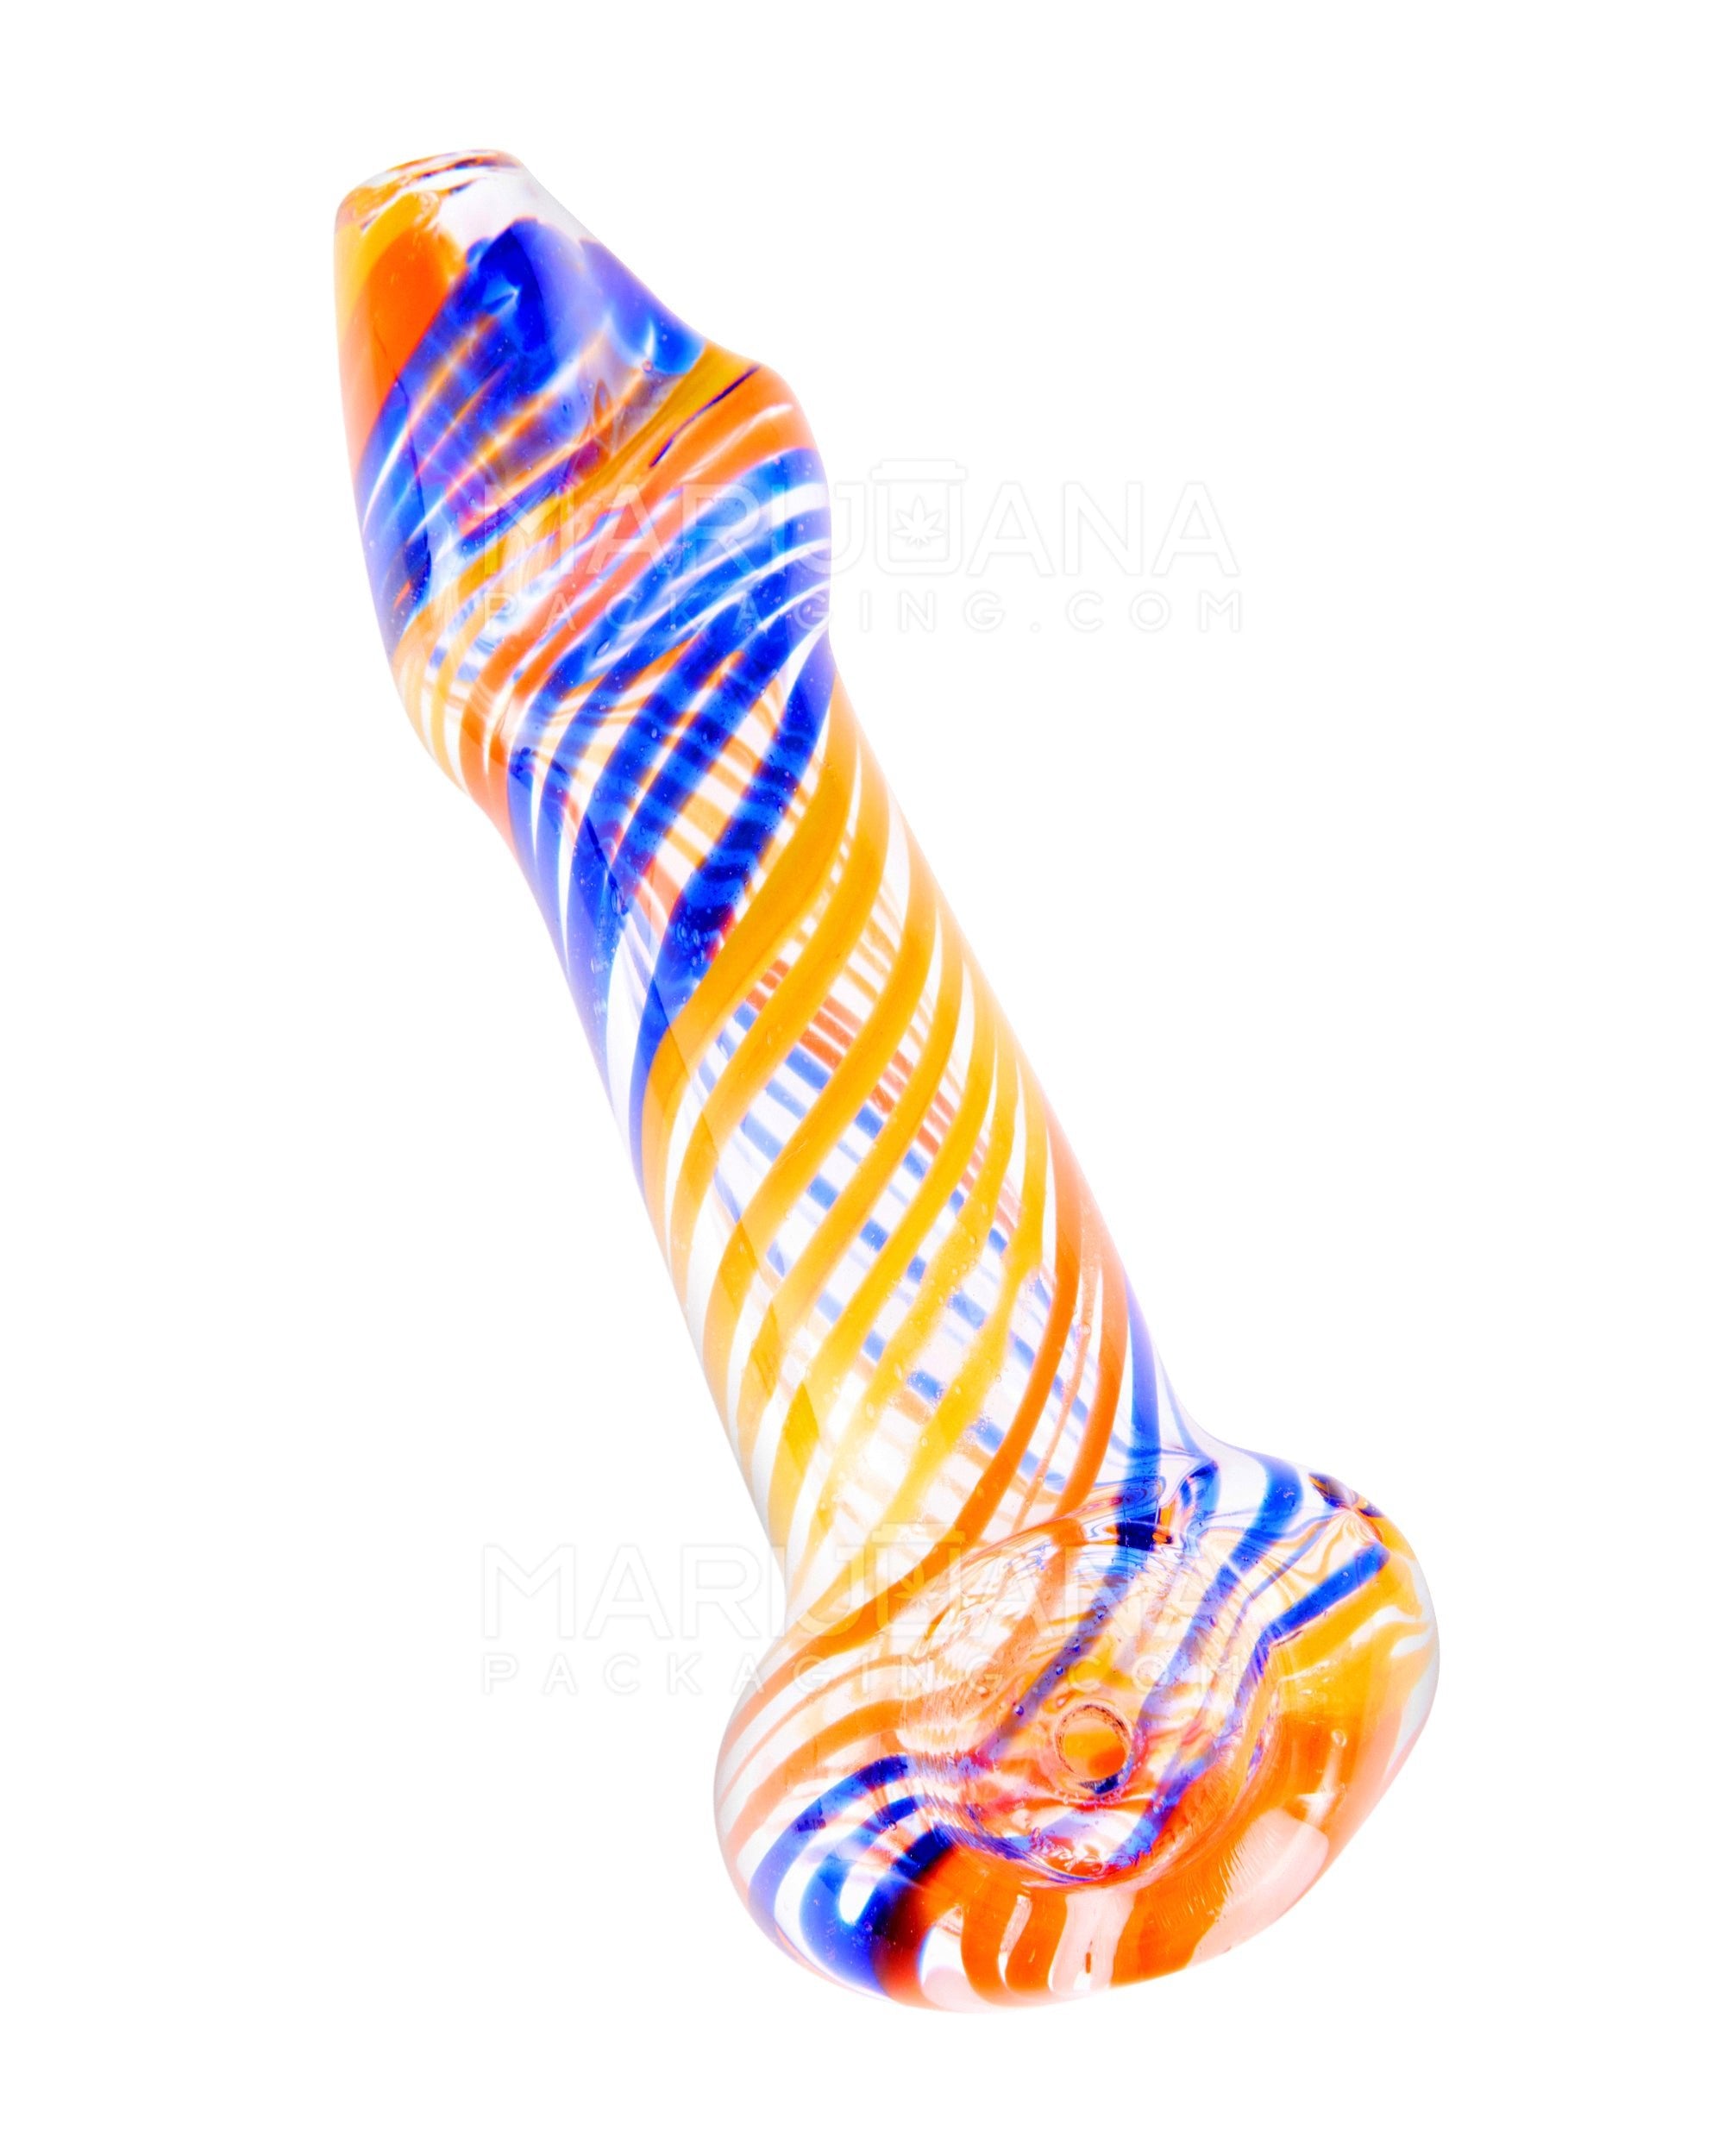 Variety Mouthpiece Spiral Spoon Hand Pipe w/ Ribboning | 4.5in Long - Glass - Assorted - 10